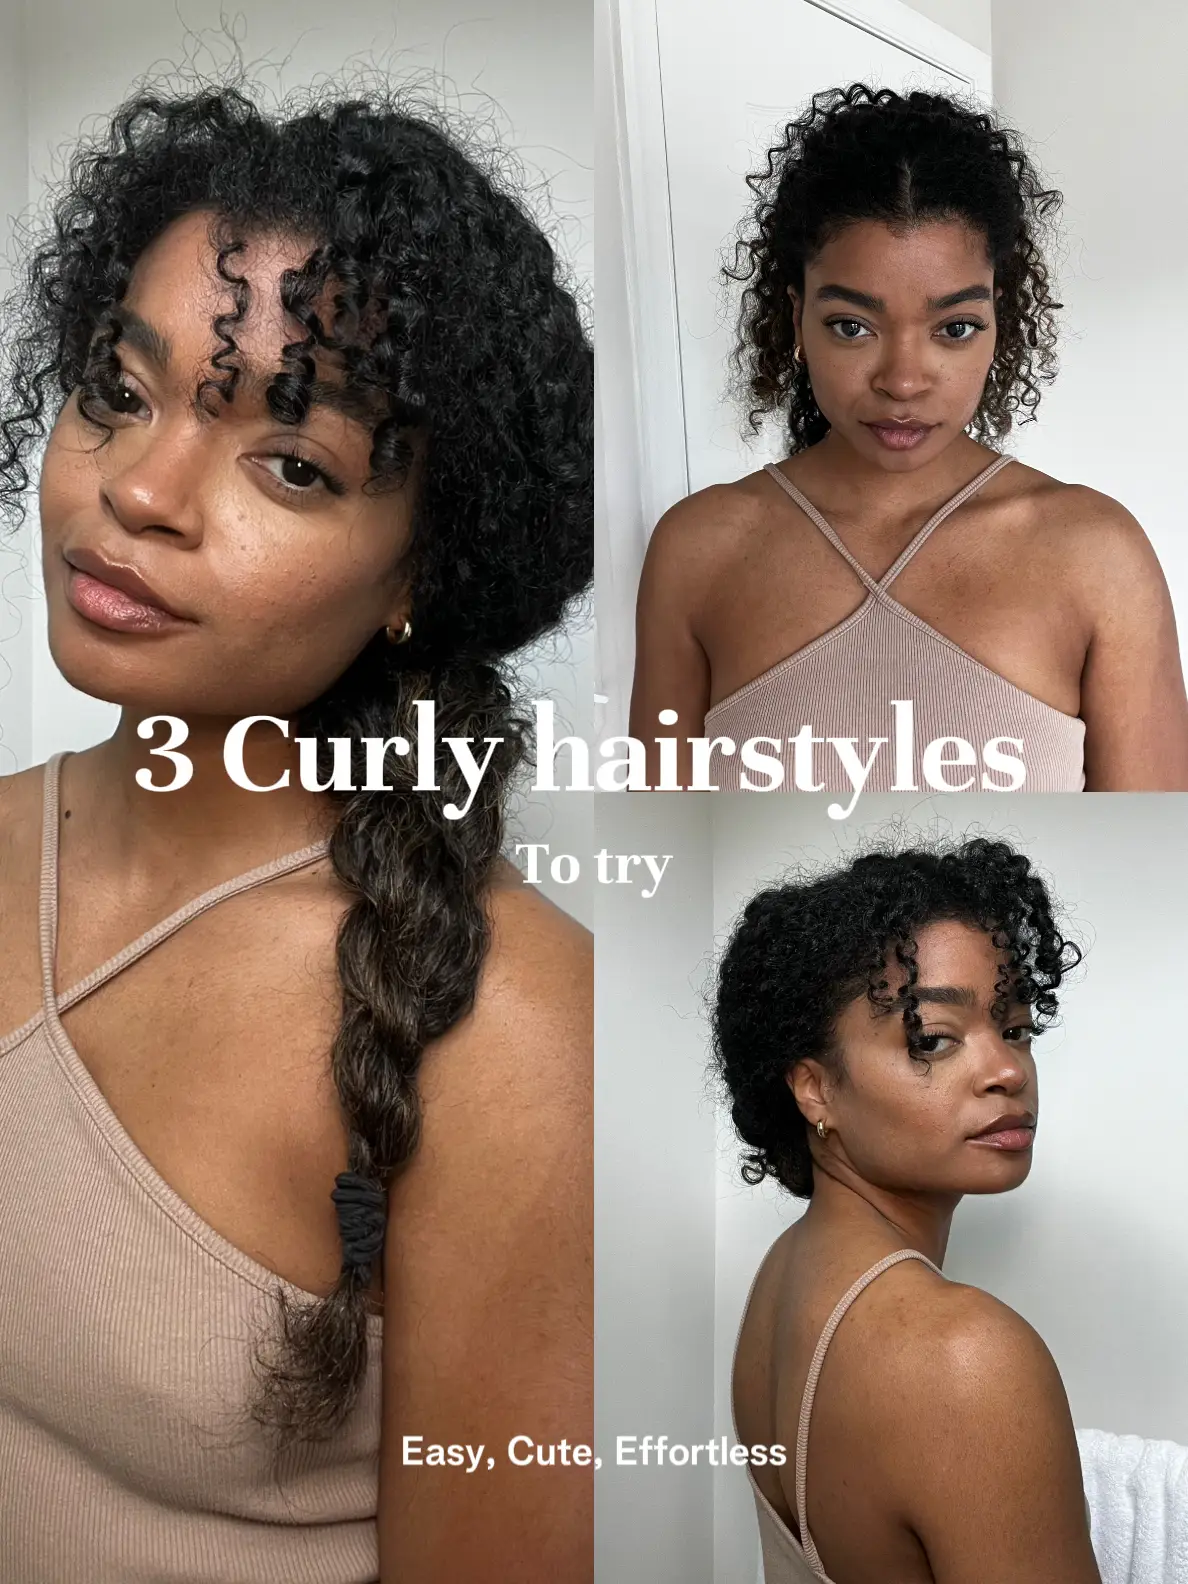 Cool Girl” Curly Hairstyle! would you try it? 🫶🏽 #curlyhair